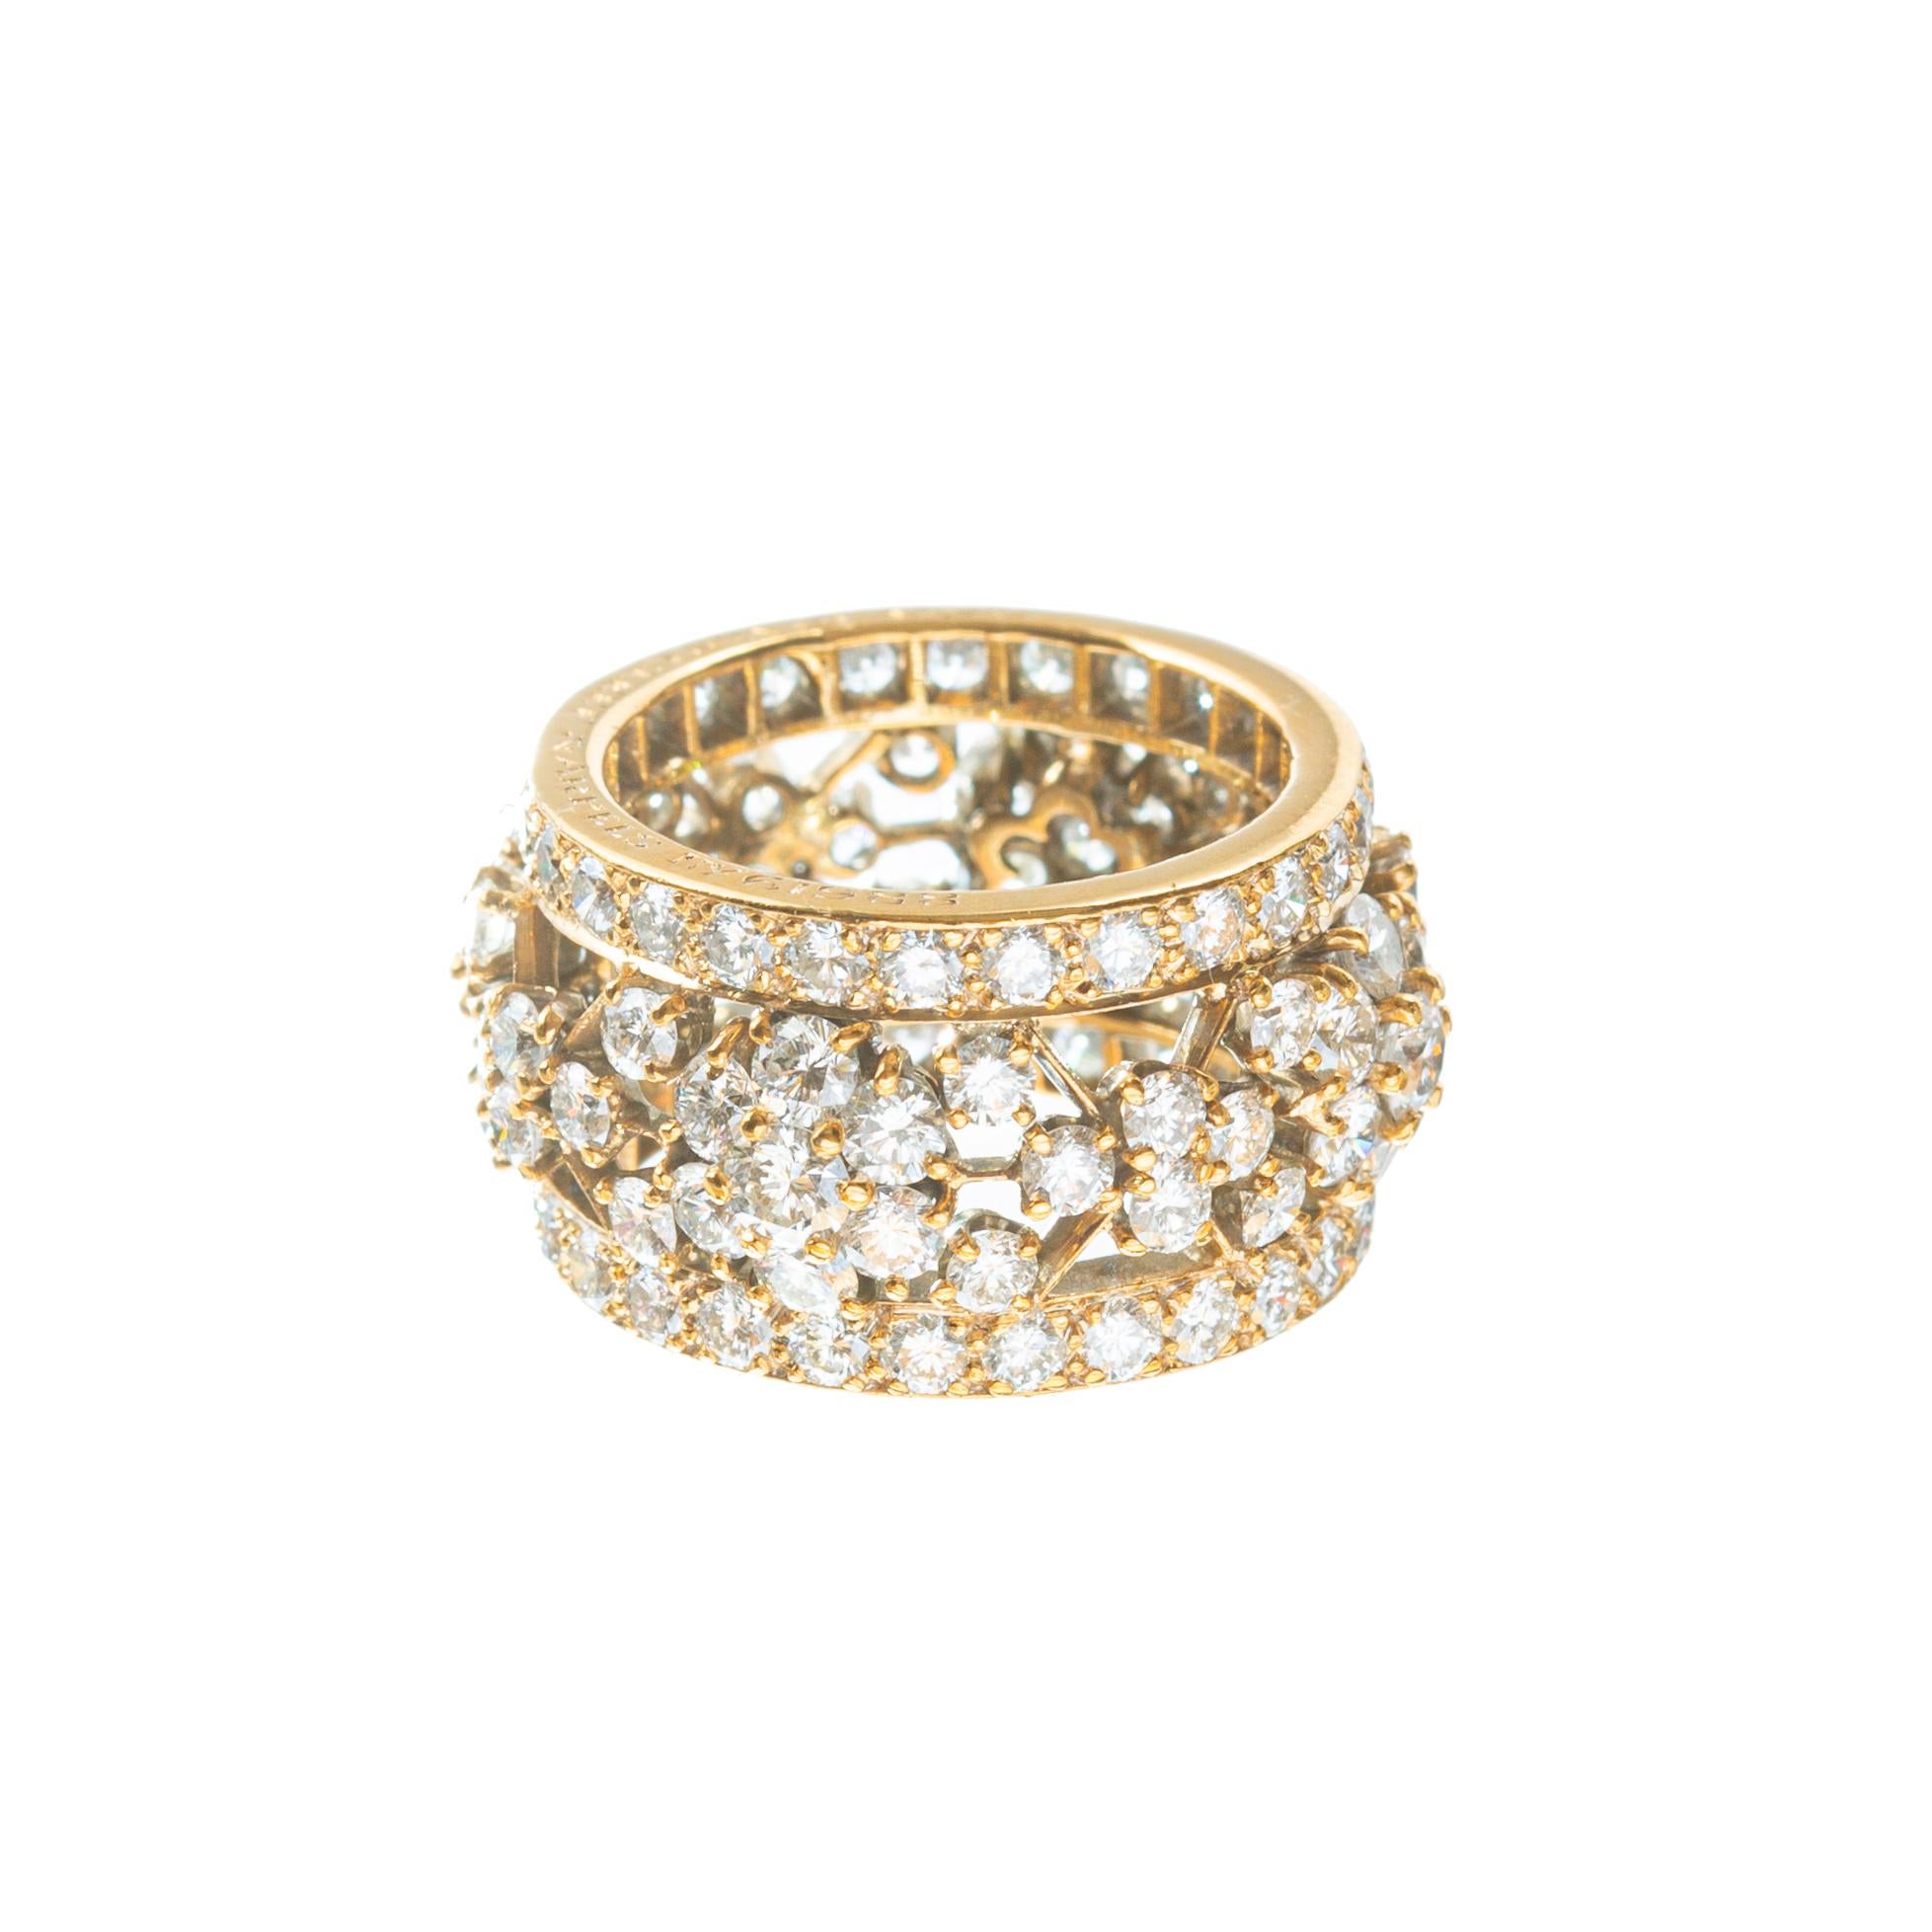 Van Cleef & Arpels 18k yellow gold and diamond band ring from the 